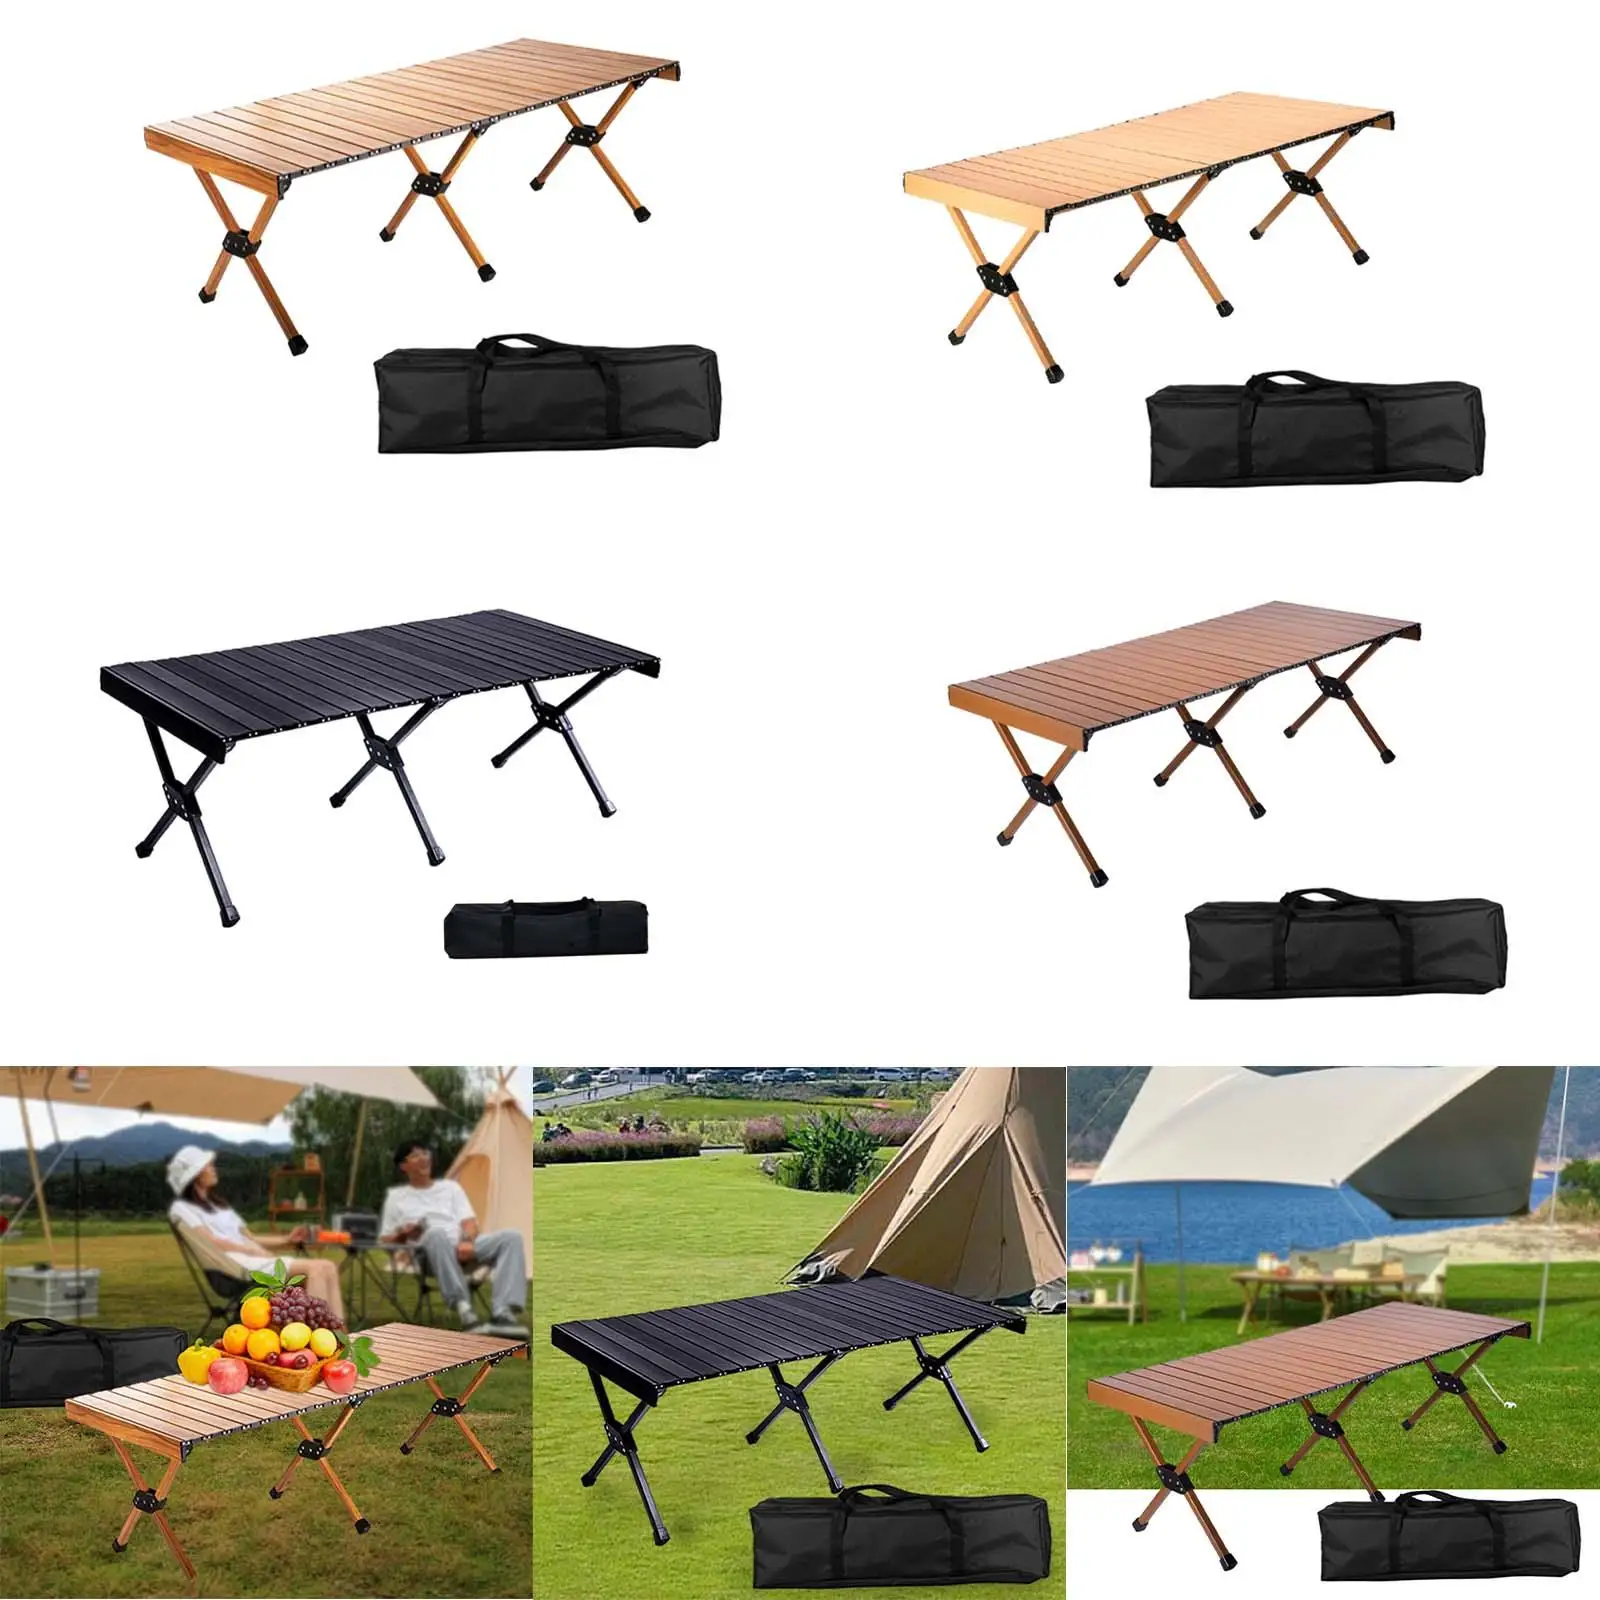 Camping Folding Table Easy to Carry Picnic Table for Garden Cooking Hiking